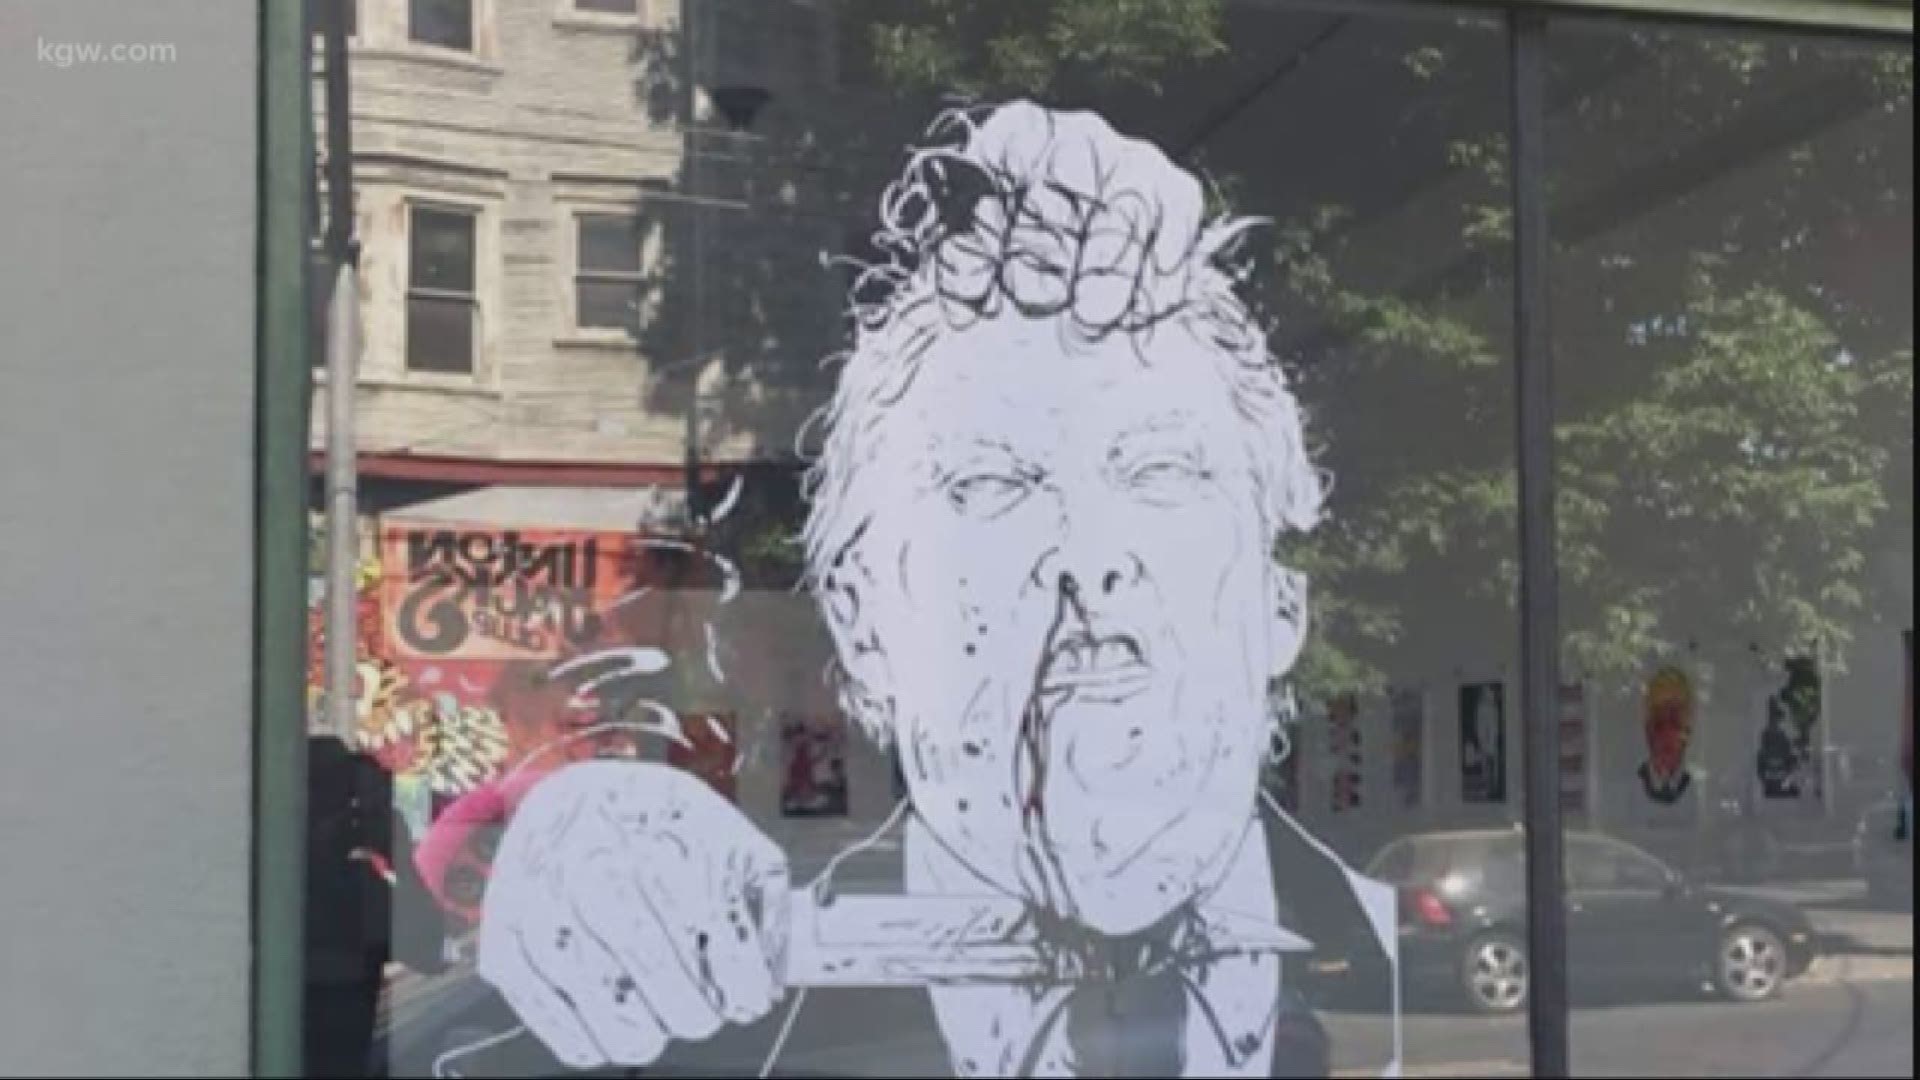 One Grand Gallery on East Burnside launched a show called "F*** You Mr. President." The show includes art from more than two dozen artists, all critical of President Donald Trump.